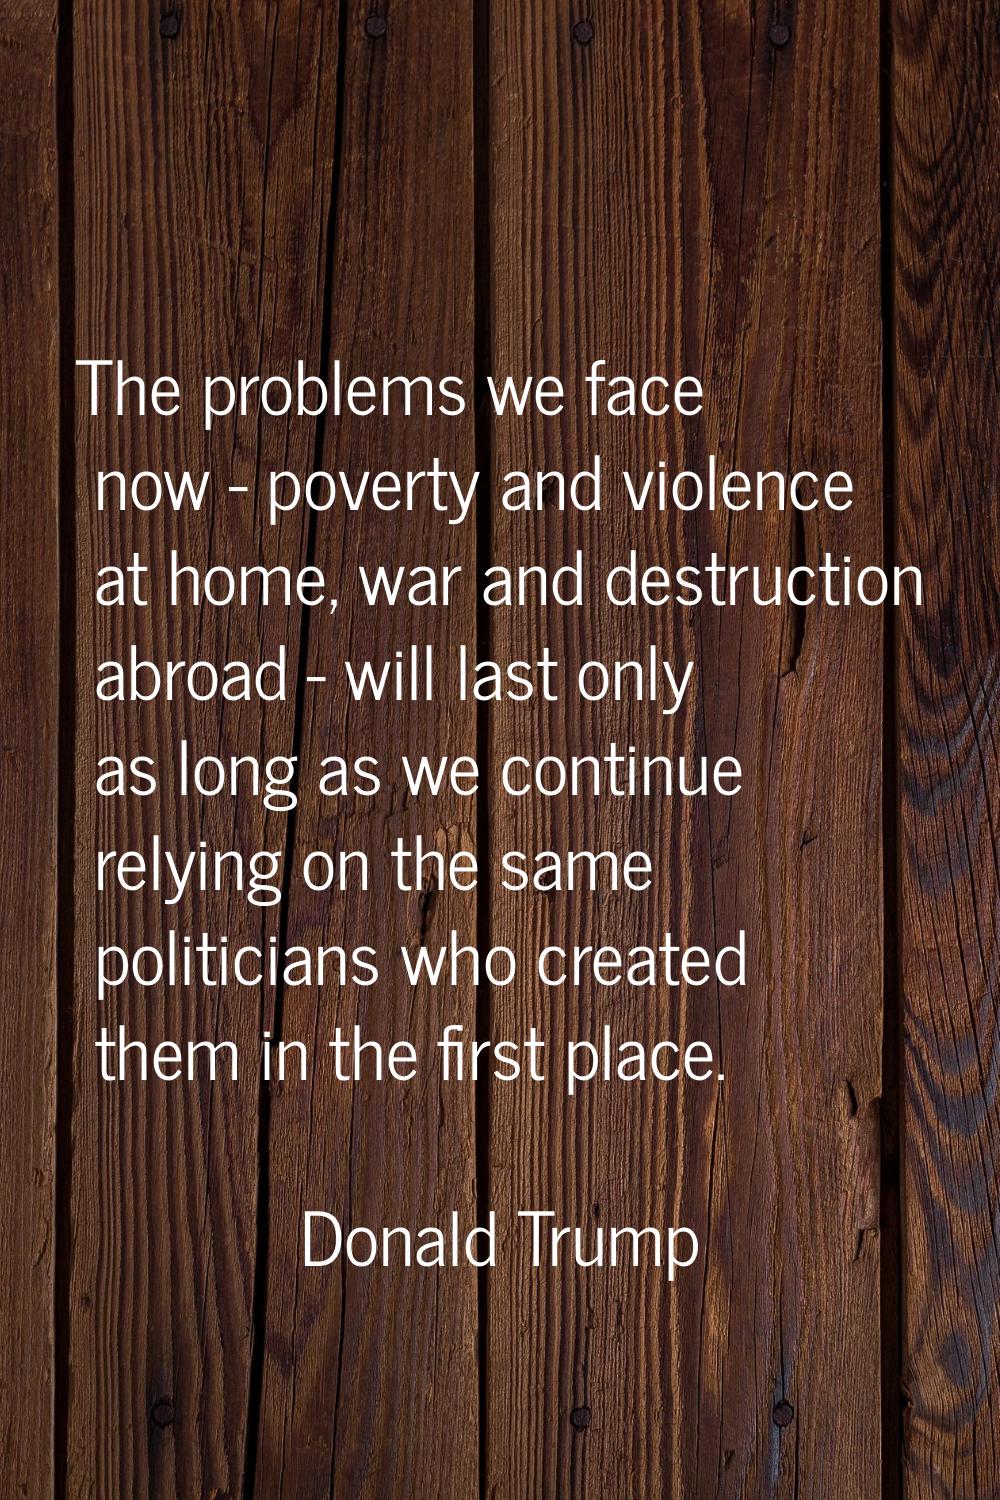 The problems we face now - poverty and violence at home, war and destruction abroad - will last onl